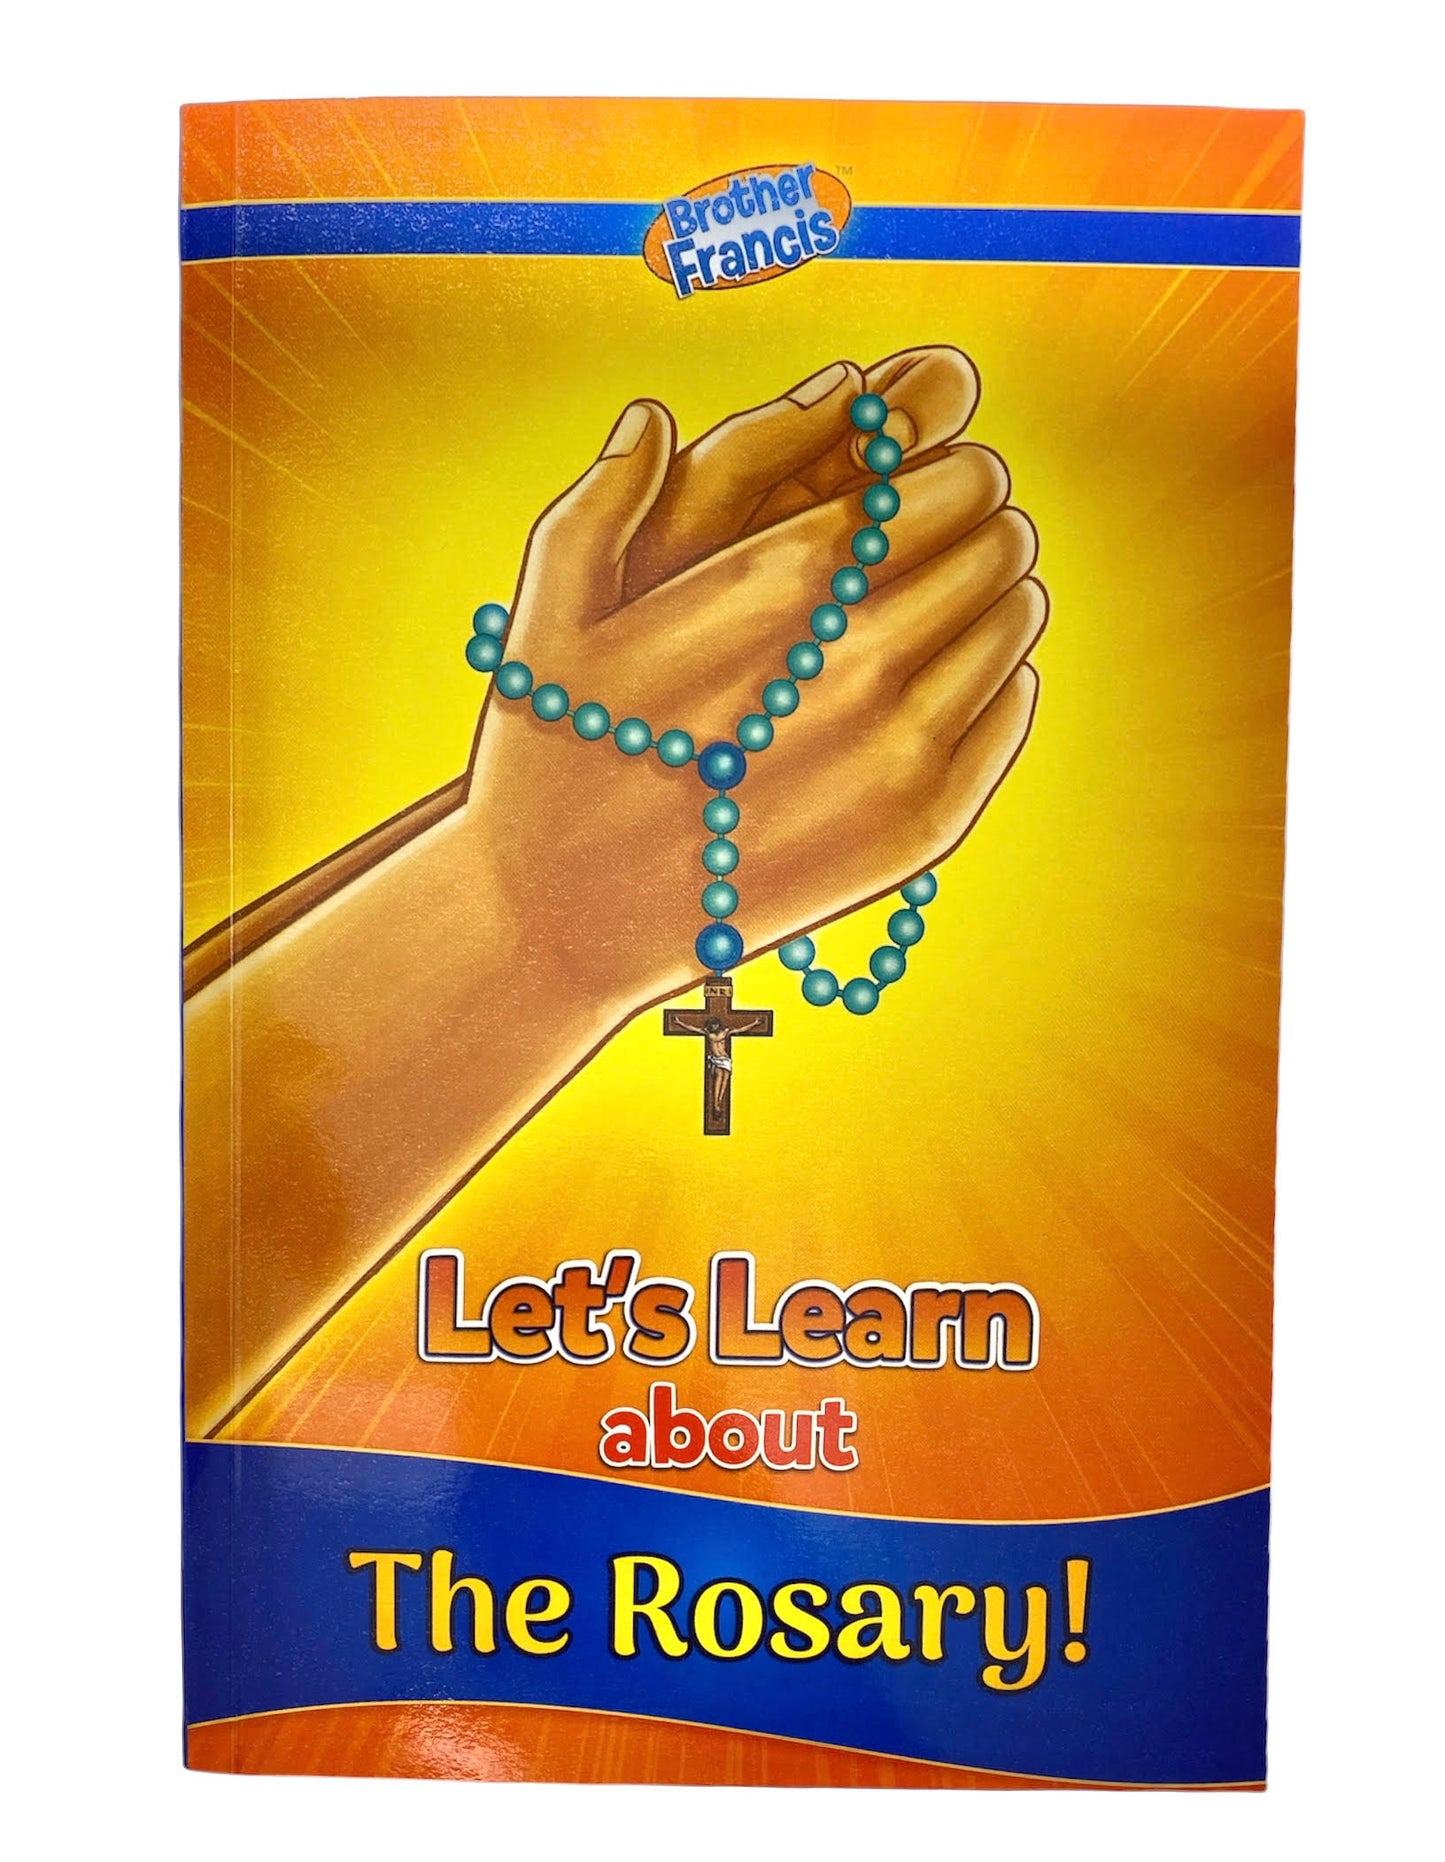 Book: Let's learn about The Rosary - For children - Brother Francis